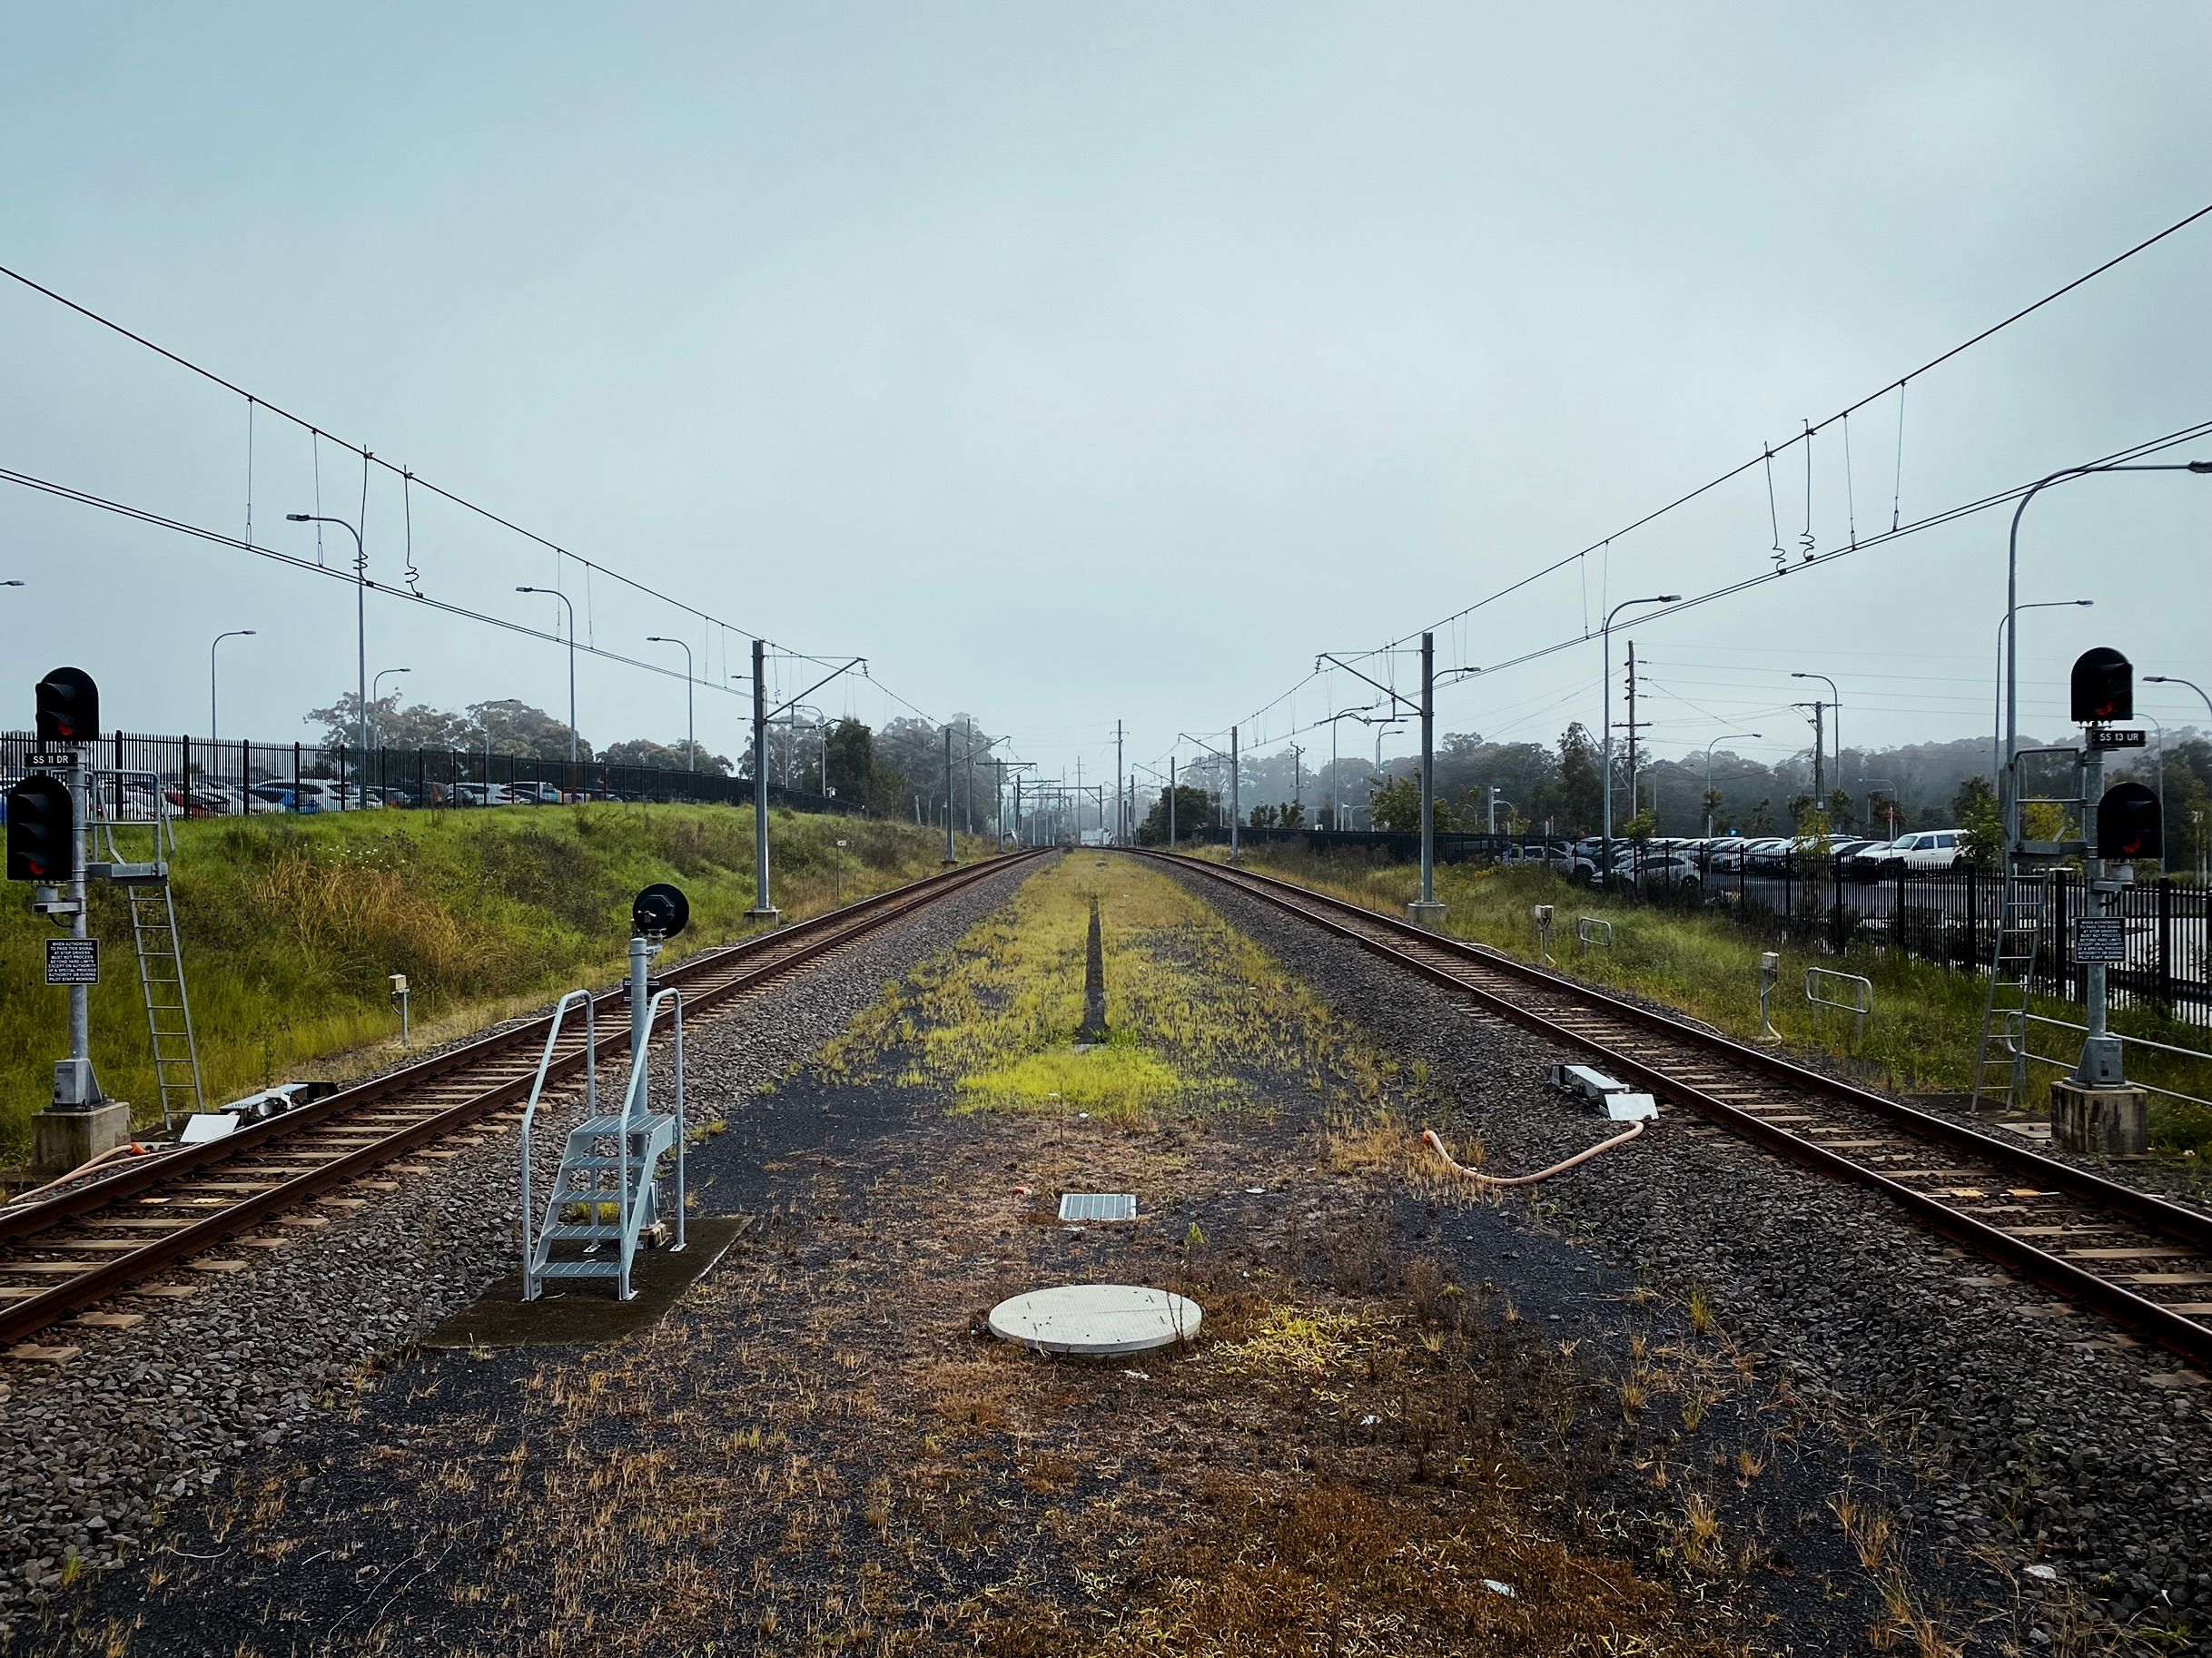 A photo taken from the end of a train station platform, looking down the tracks. It's overcast and slightly foggy, and the weeds between and on either side of the track are a little overgrown.